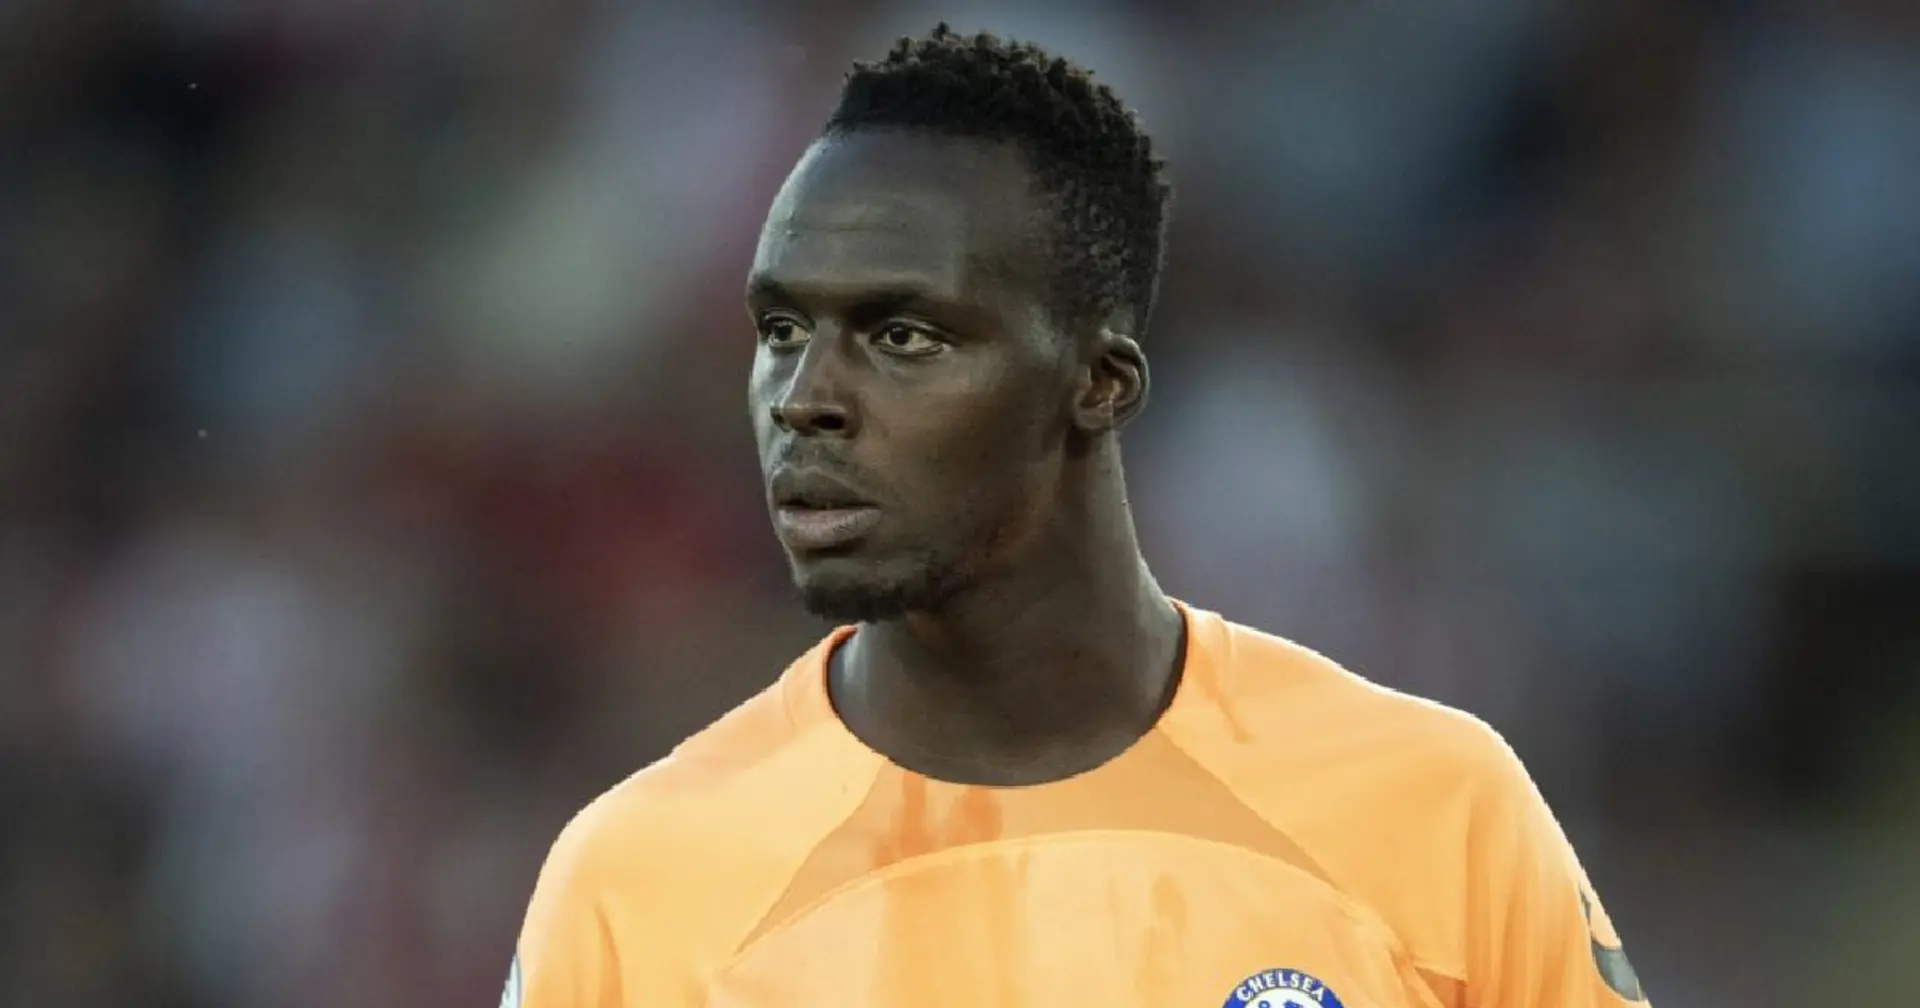 Chelsea 'to listen to offers' for Mendy in 2023, keeper open to exit (reliability: 4 stars)